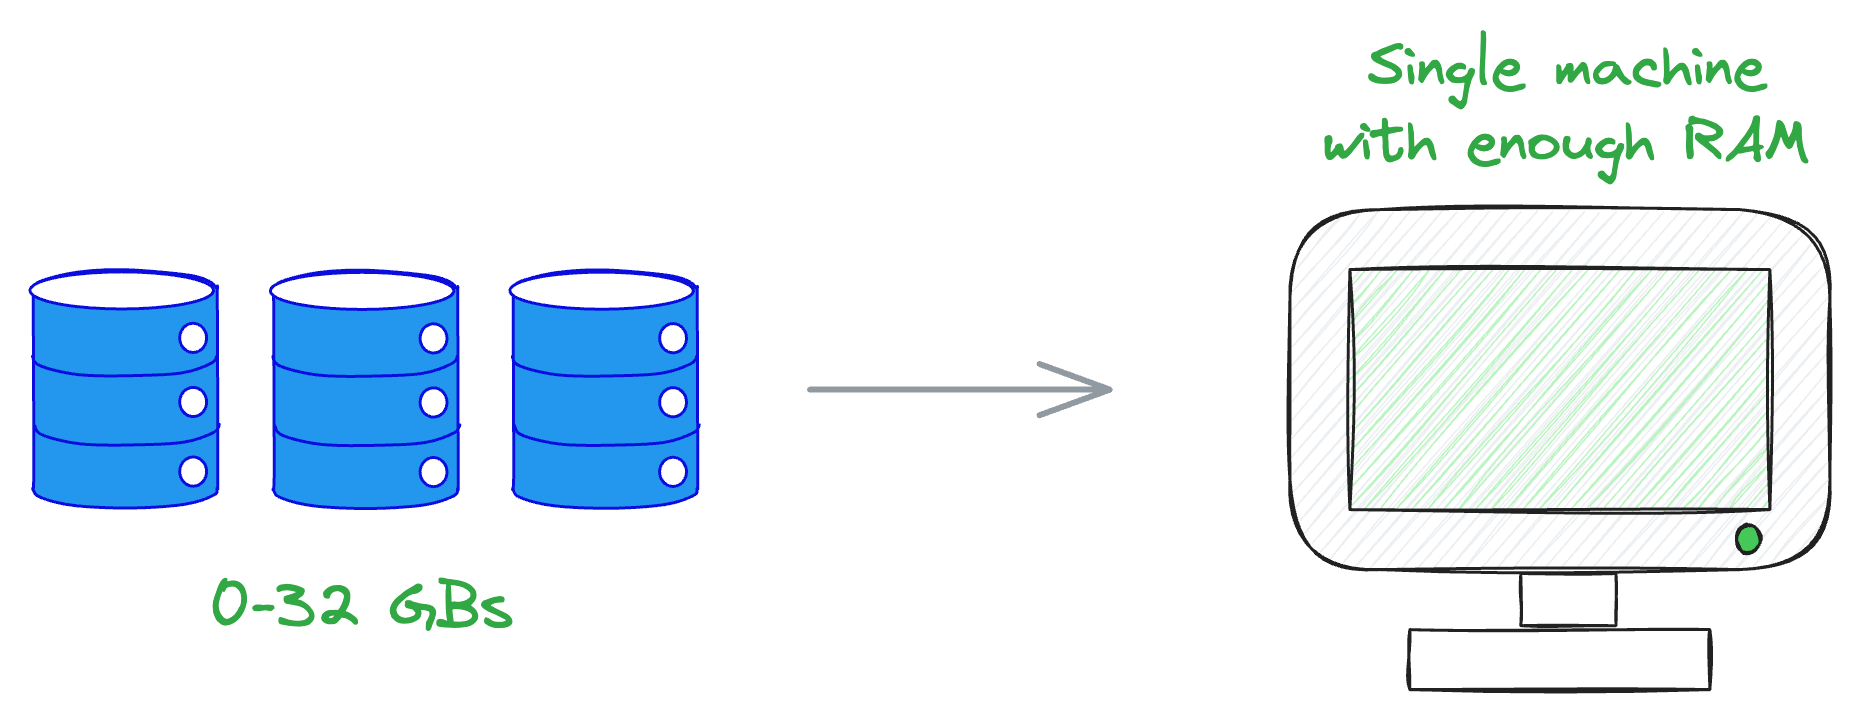 Don't Stop at Pandas and Sklearn! Get Started with Spark DataFrames and Big Data ML using PySpark